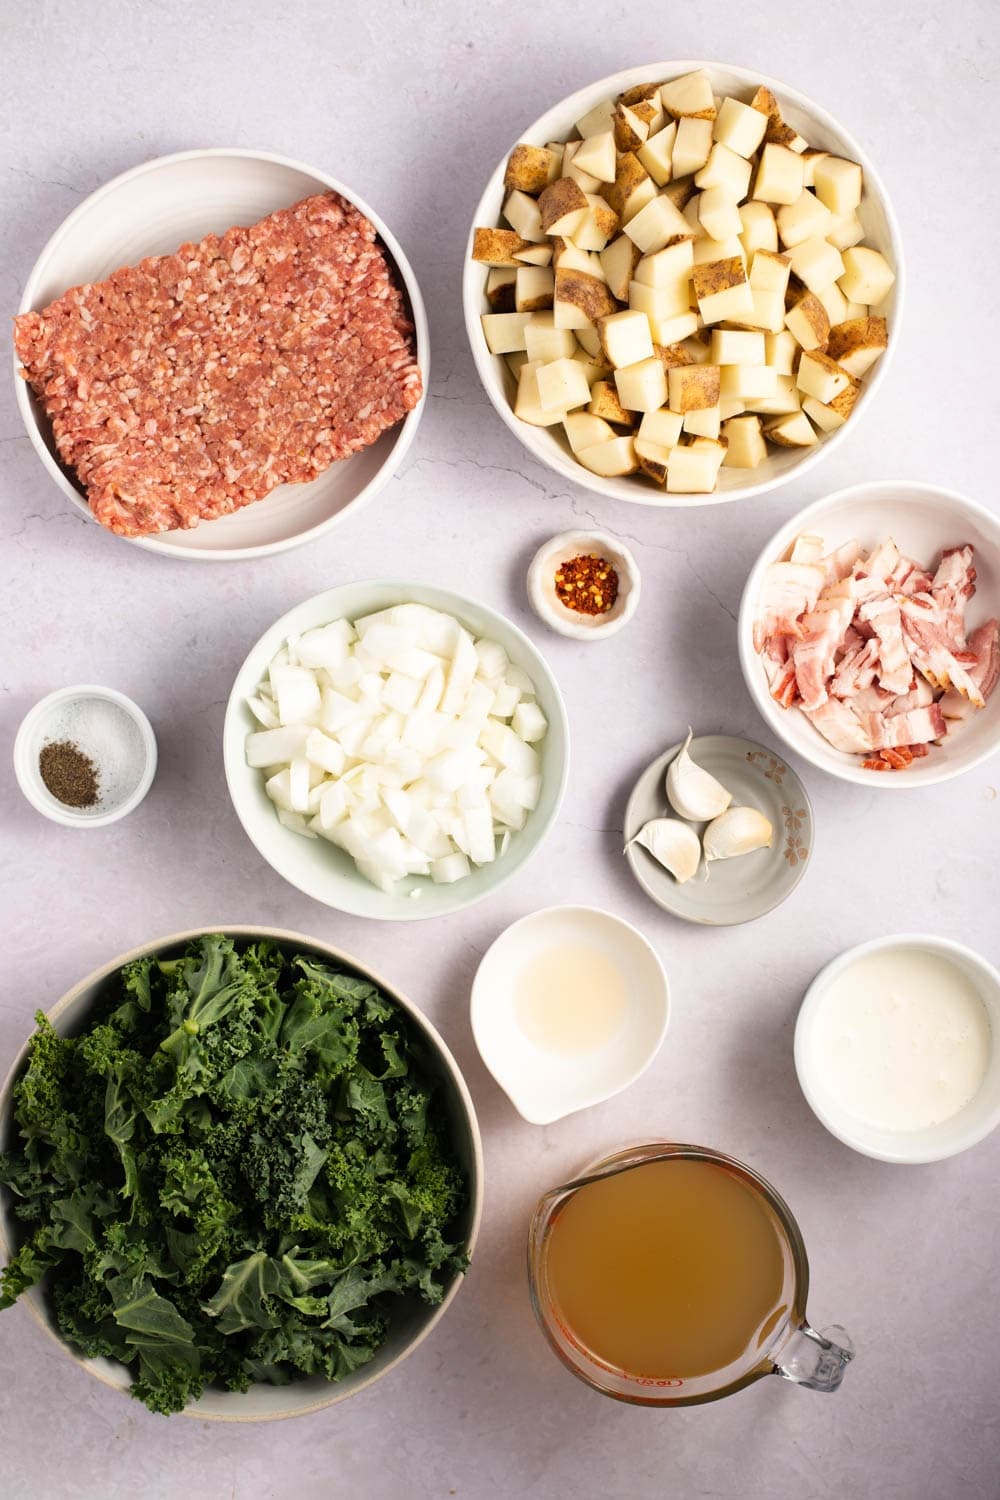 Zuppa Toscana Soup Ingredients - Italian Sausage, Bacon, Potatoes, Garlic, Onion, Chicken Broth, Kale and Heavy Cream